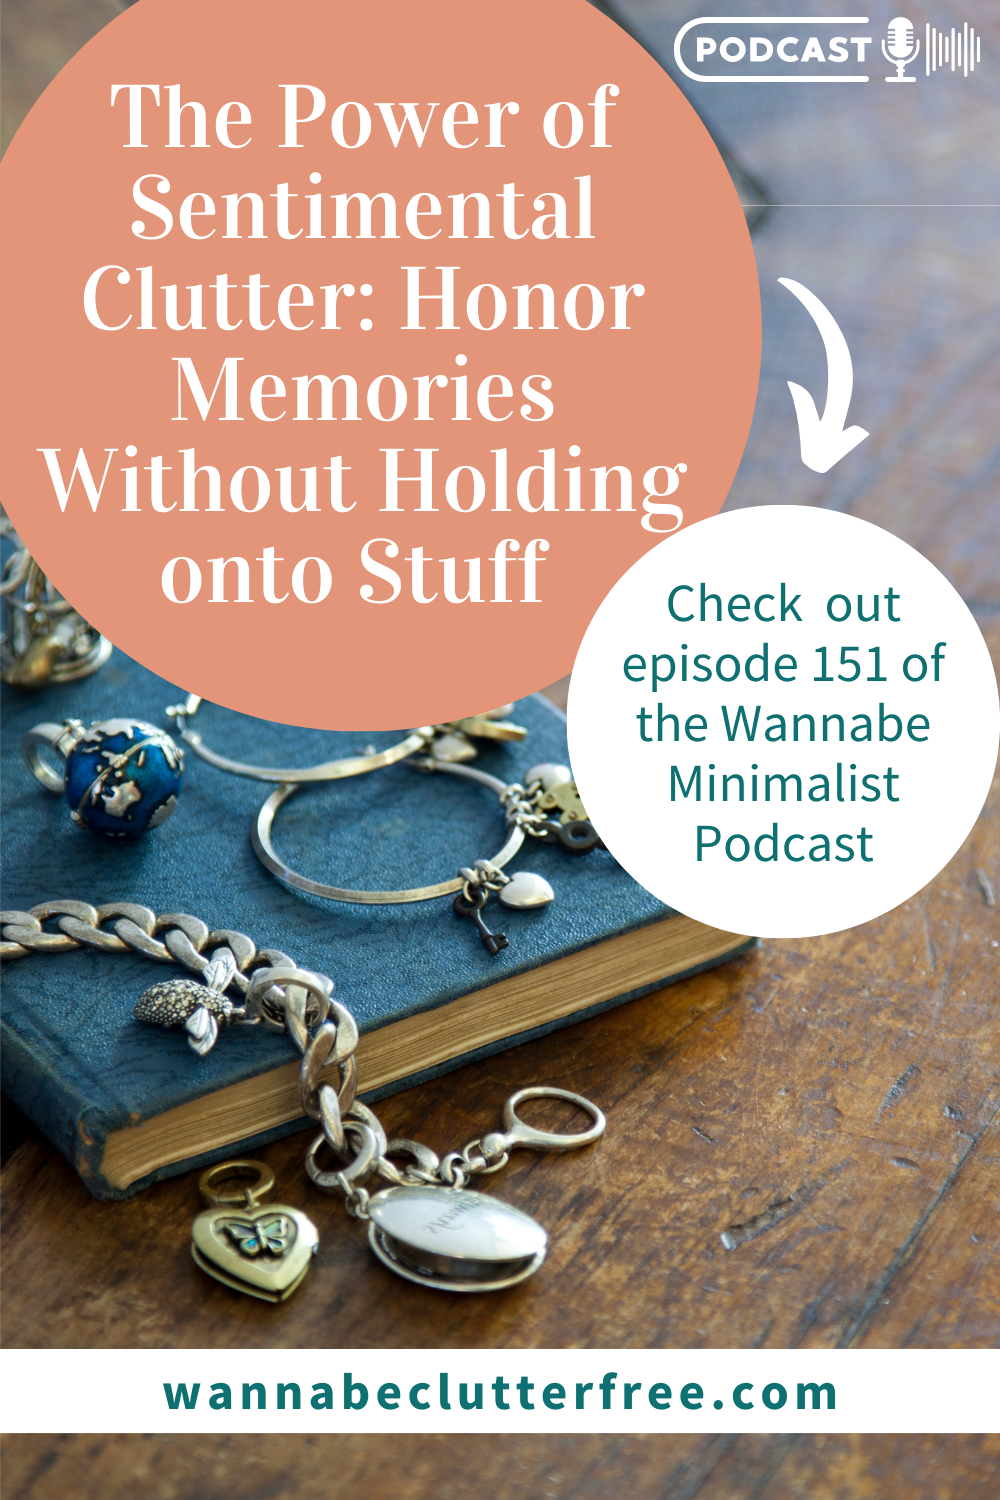 The Power of Sentimental Clutter: Honor Memories without Holding onto Stuff